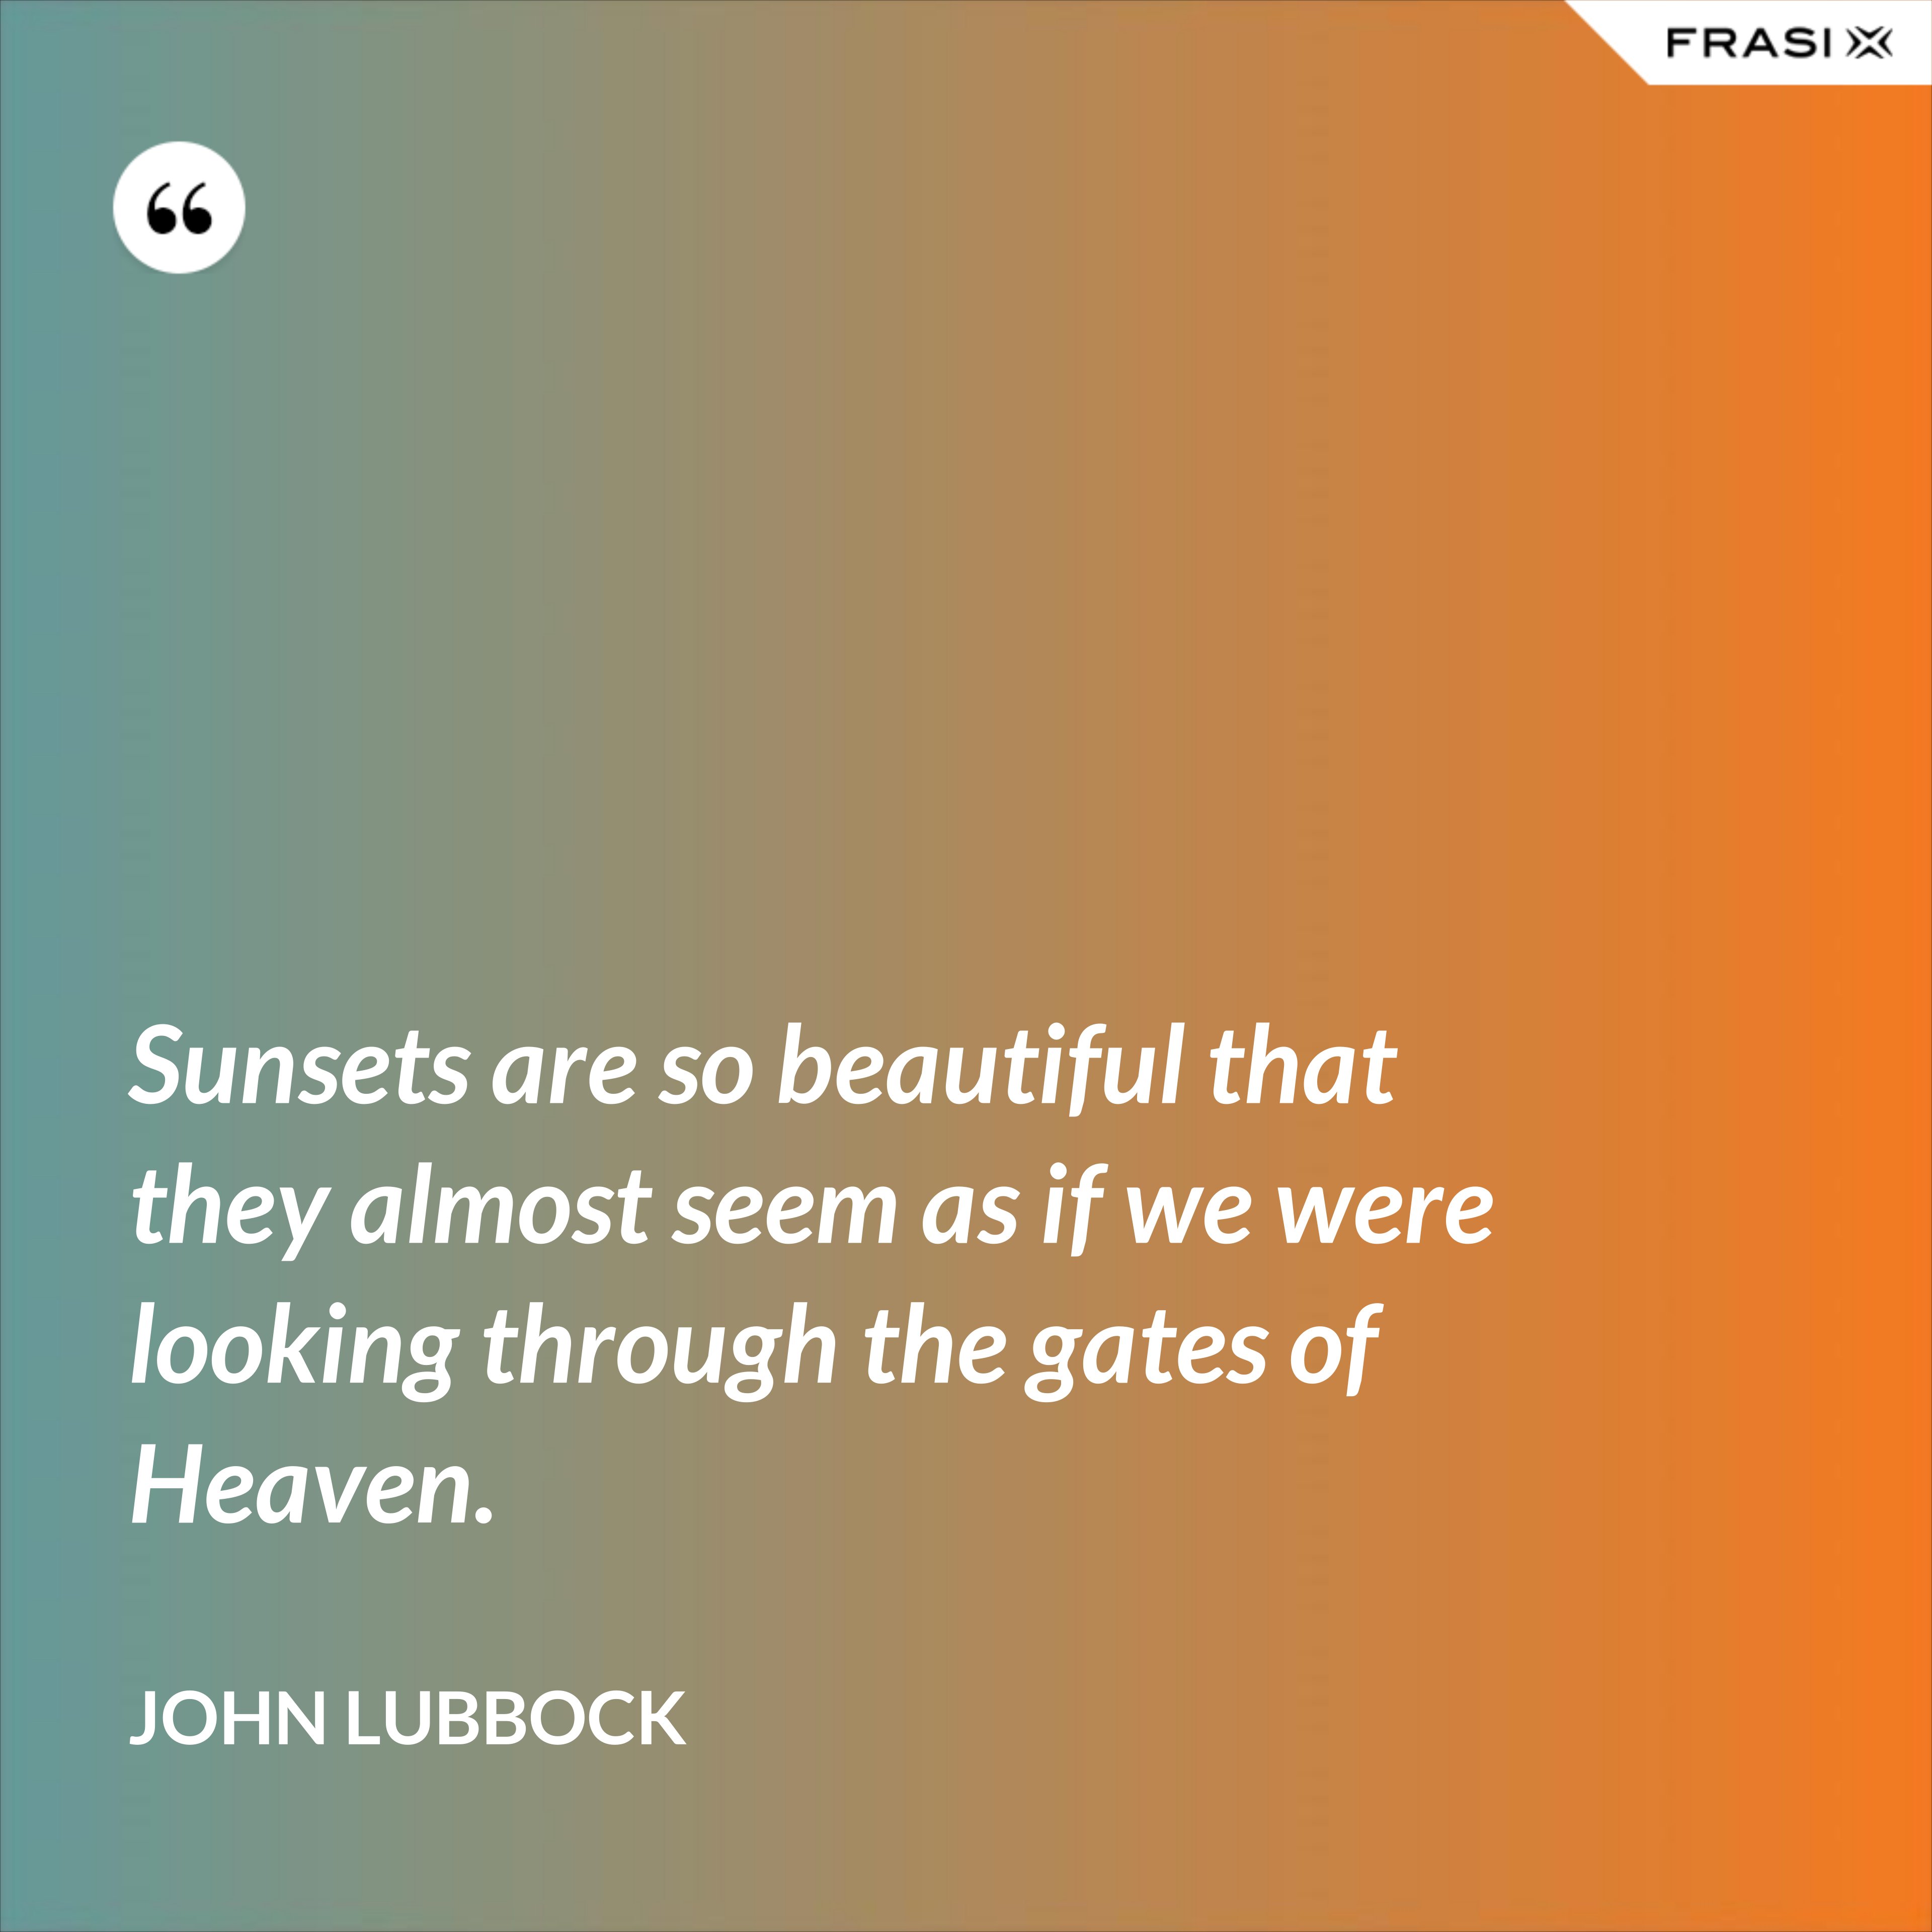 Sunsets are so beautiful that they almost seem as if we were looking through the gates of Heaven. - John Lubbock